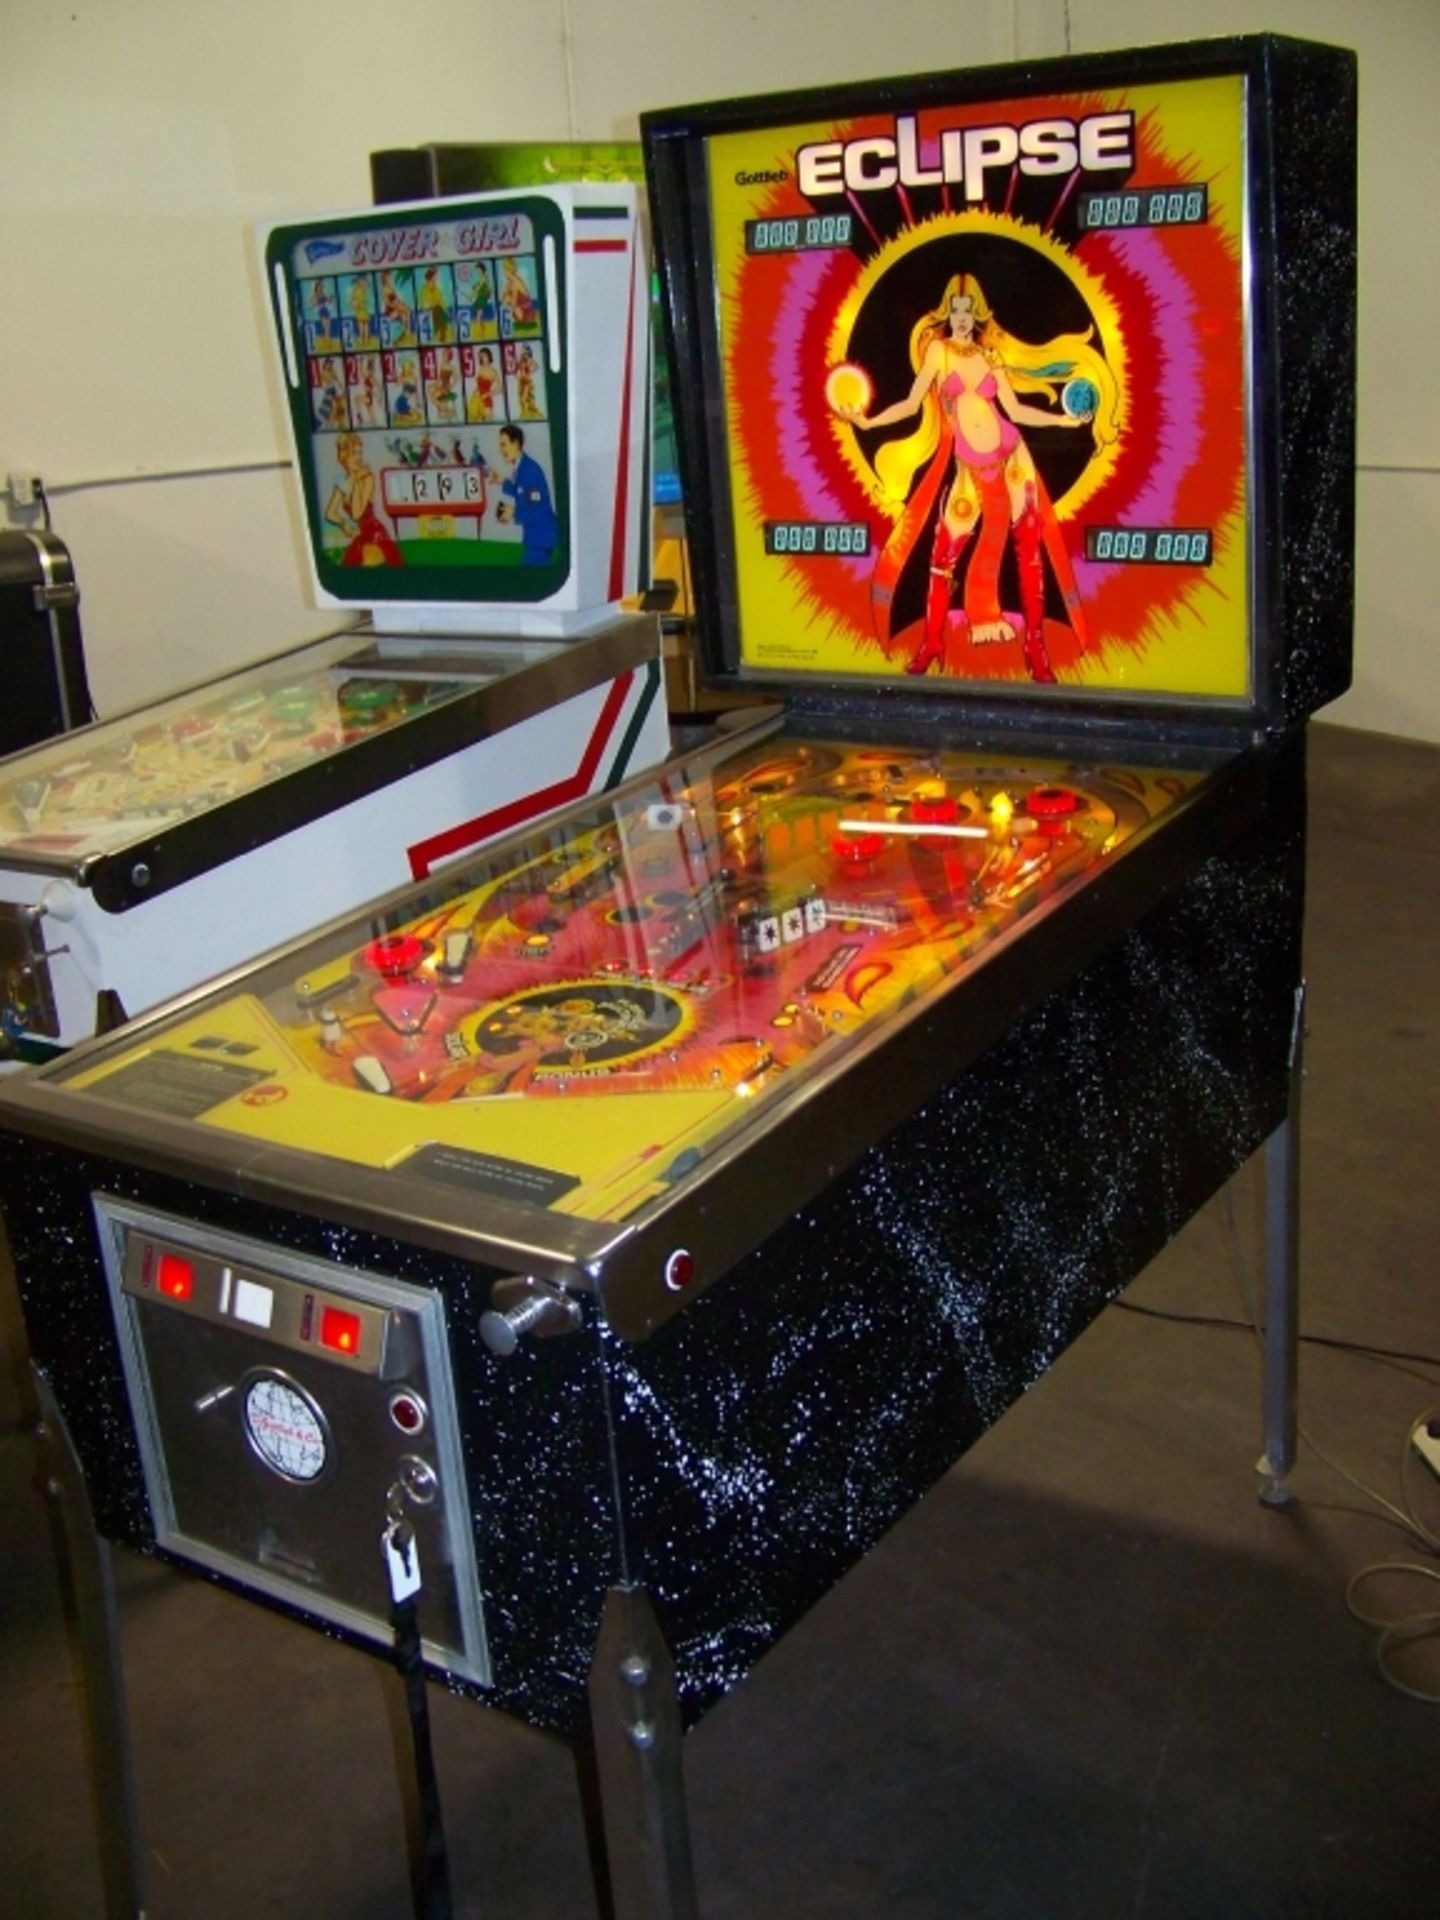 ECLIPSE PINBALL MACHINE RARE GOTTLIEB TITLE 1982 Item is in used condition. Evidence of wear and - Image 2 of 11